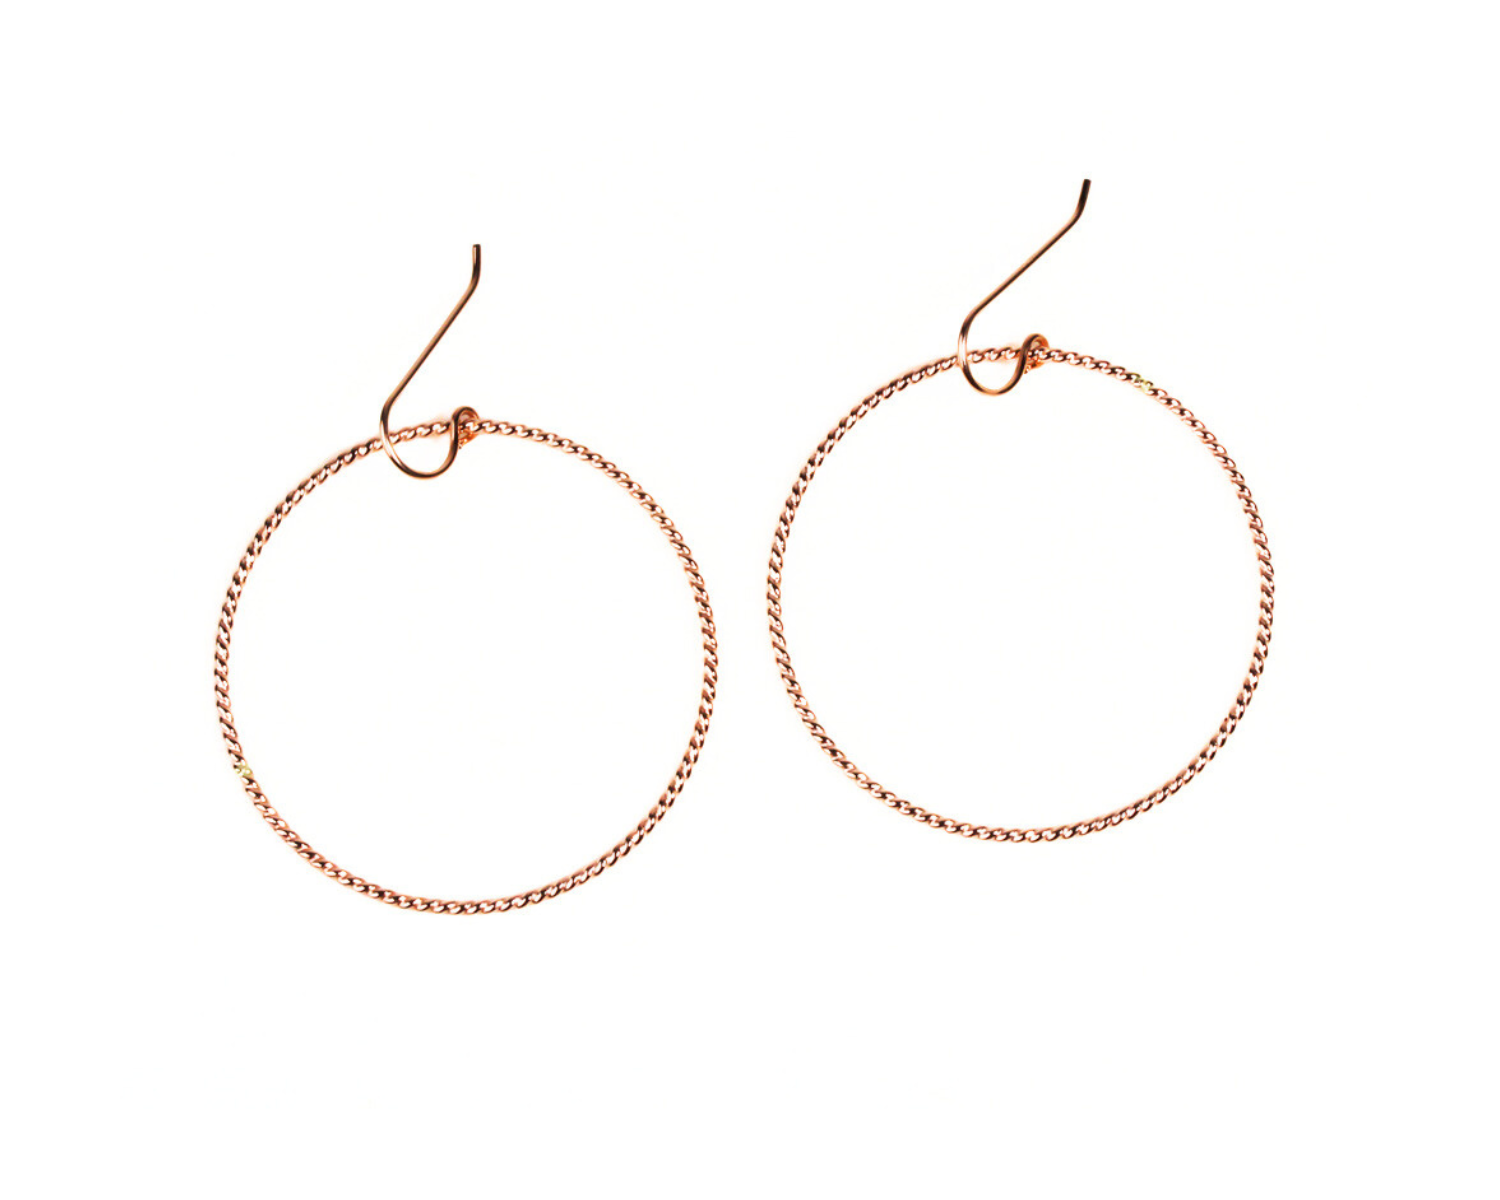 Timeless and elevated, Twisted Hoop Earrings are ideal for any look and all occasions. Each element of our Twisted Hoop Earrings is handcrafted to perfection, from their gleaming fine metal materials to their simple yet impactful design.